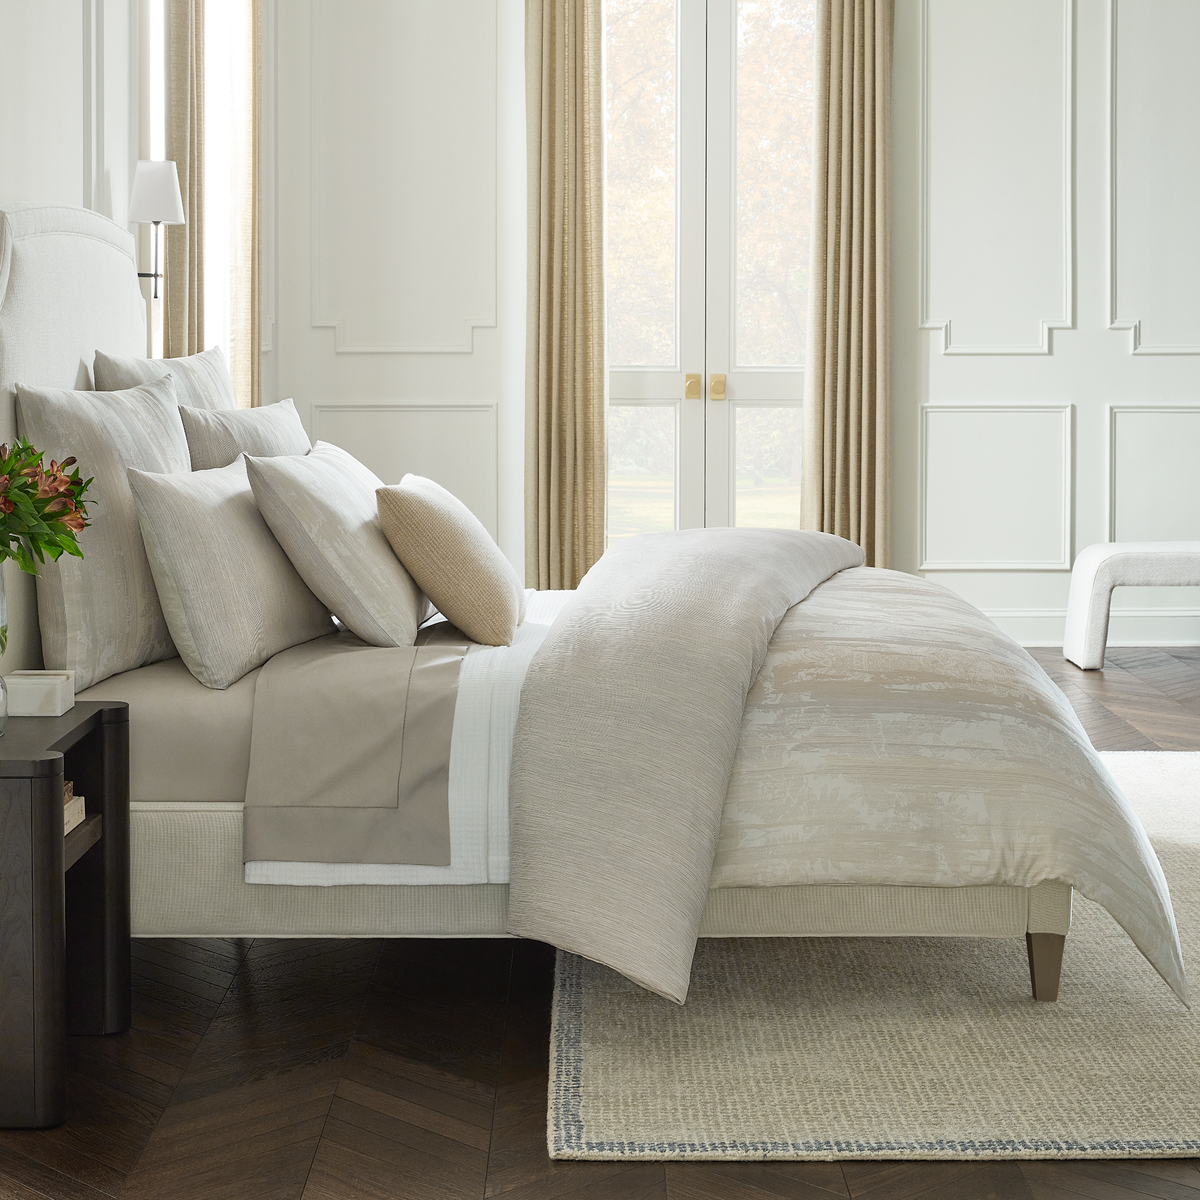 Sideview of Full Bed Dressed in Sferra Cloister Bedding in Fog Color